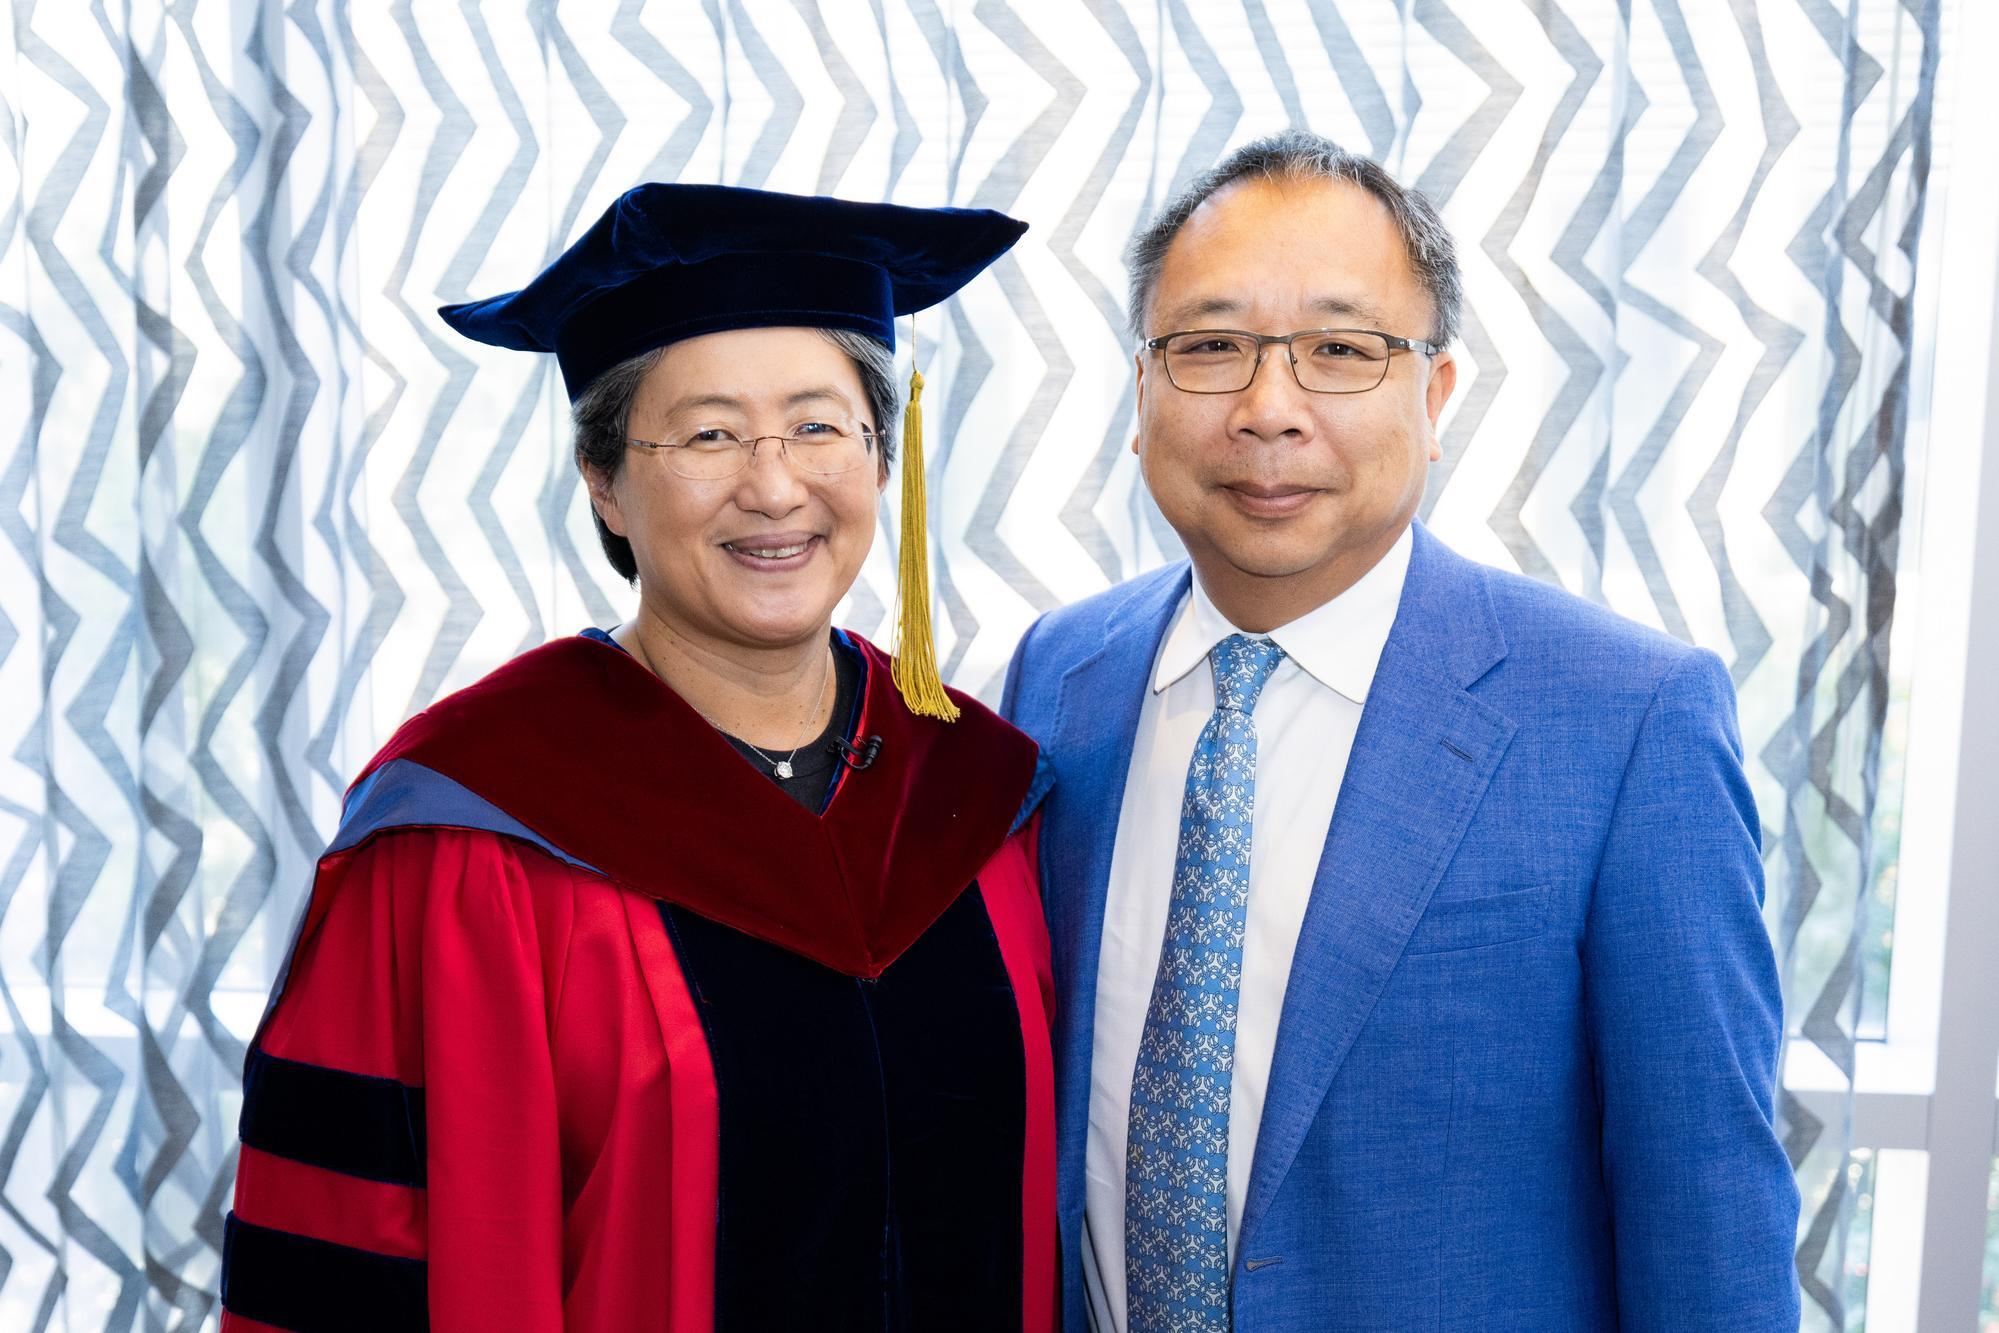 Lisa Su (蘇姿丰) and her husband Daniel Lin (丹尼爾‧林) taking photos after the Honorary Doctorate Award Ceremony.